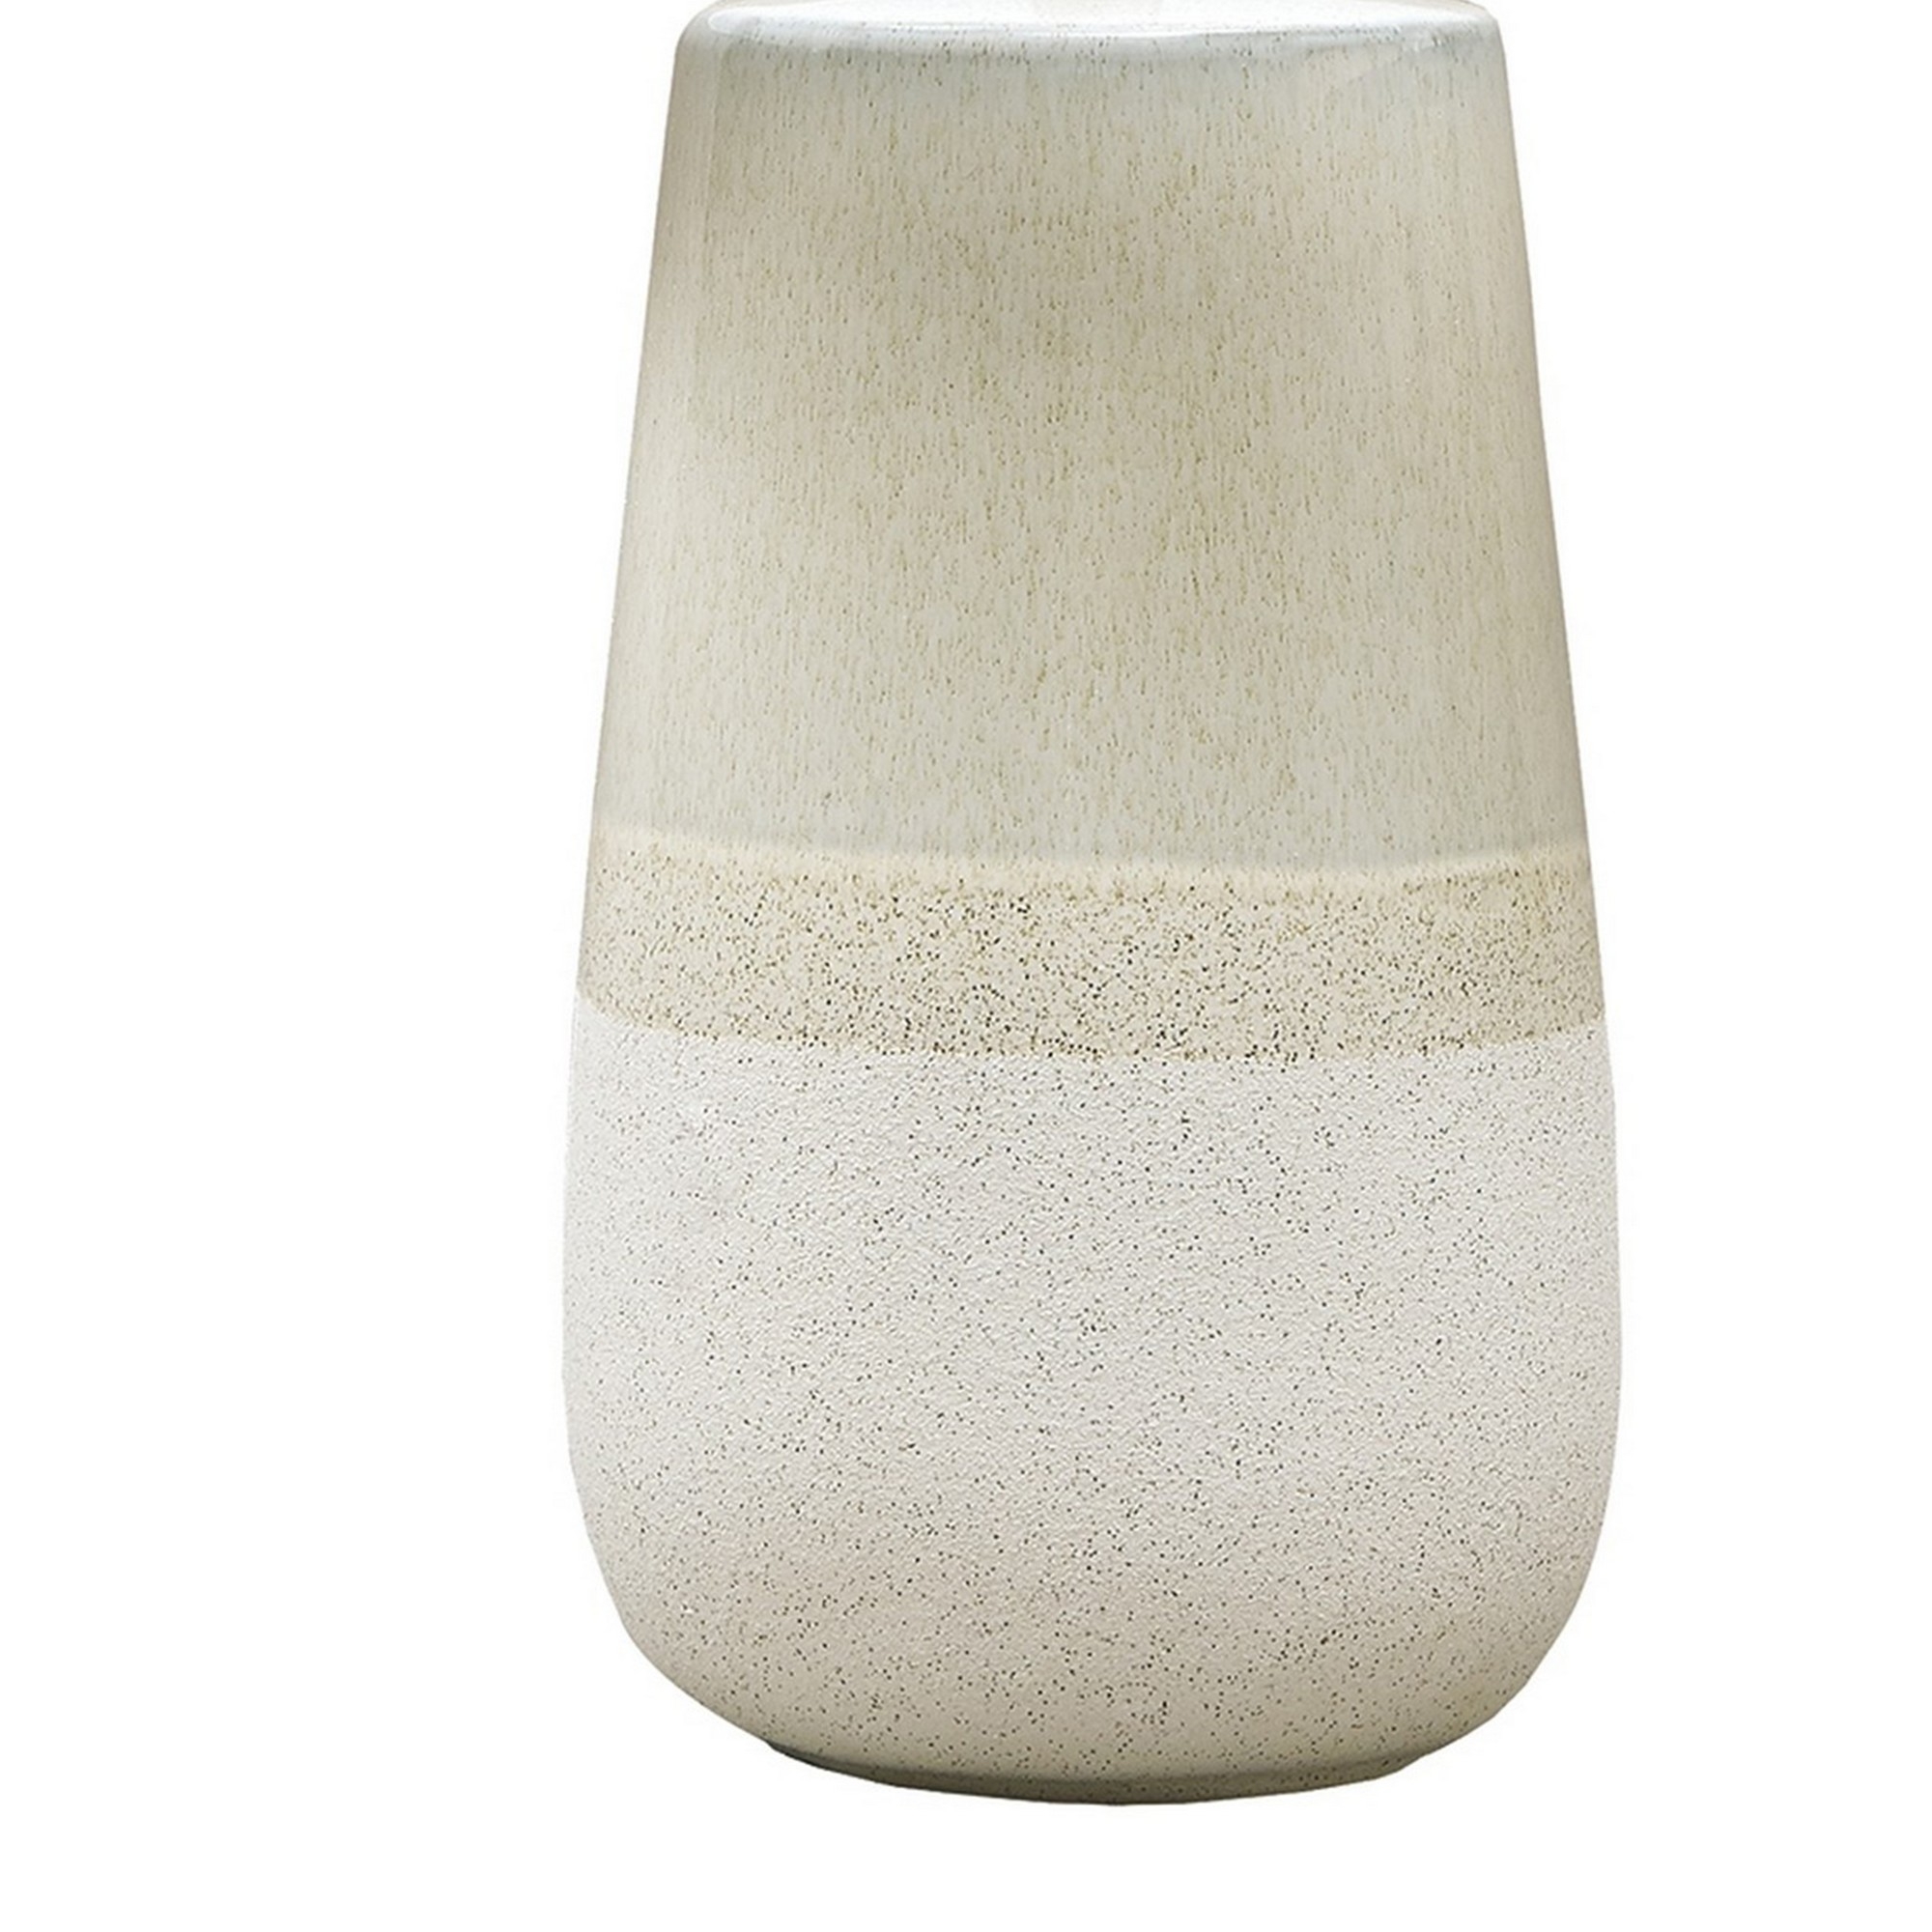 Speckled Ceramic Base Table Lamp With Drum Shade, Beige- Saltoro Sherpi